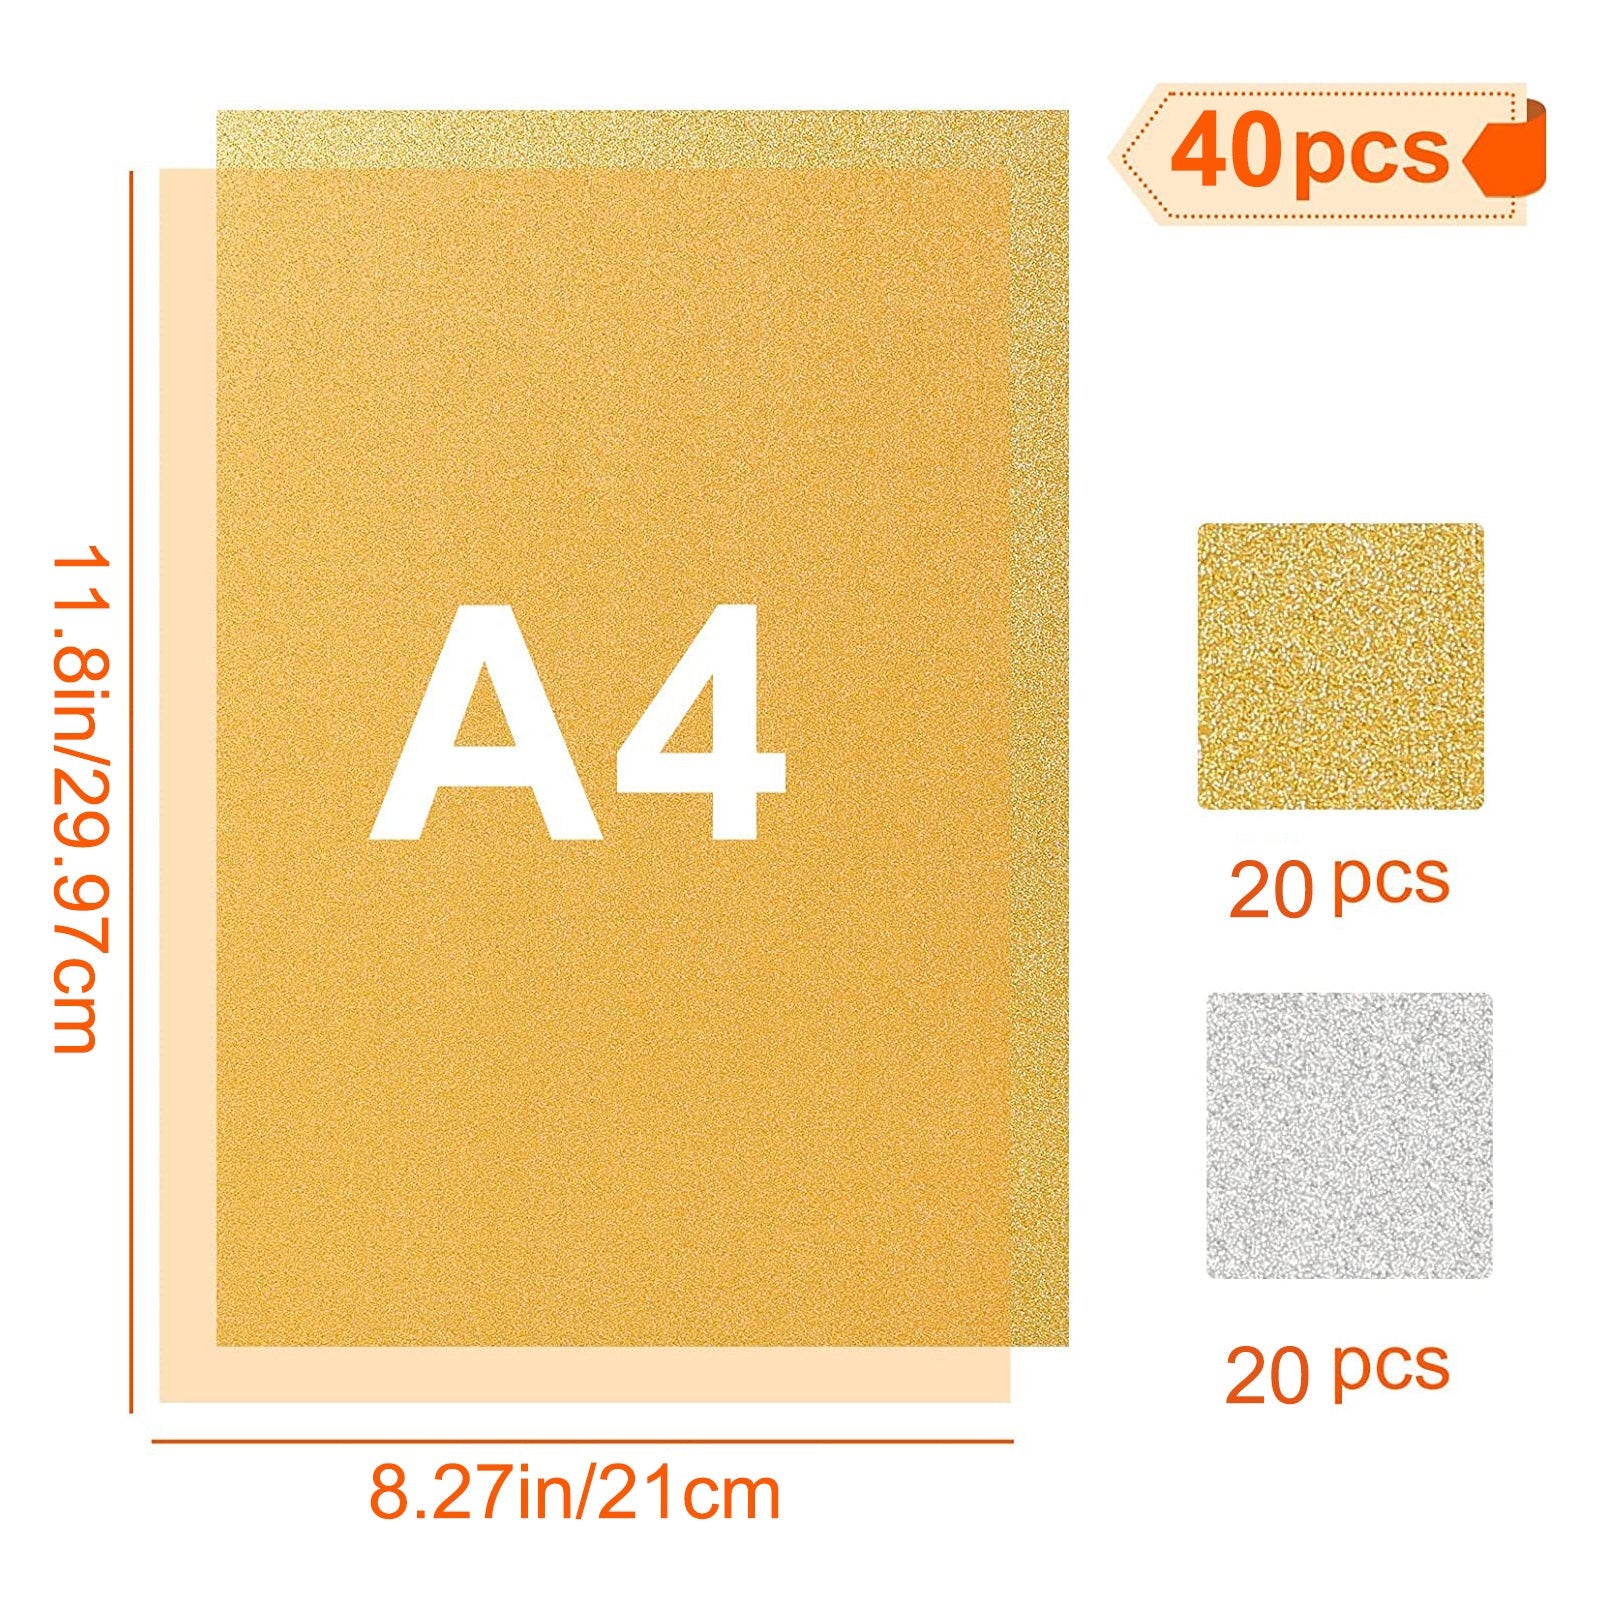 40 Sheets Gold Silver Glitter Cardstock Paper A4 Self Adhesive Glitter Paper 250 GSM for Crafts